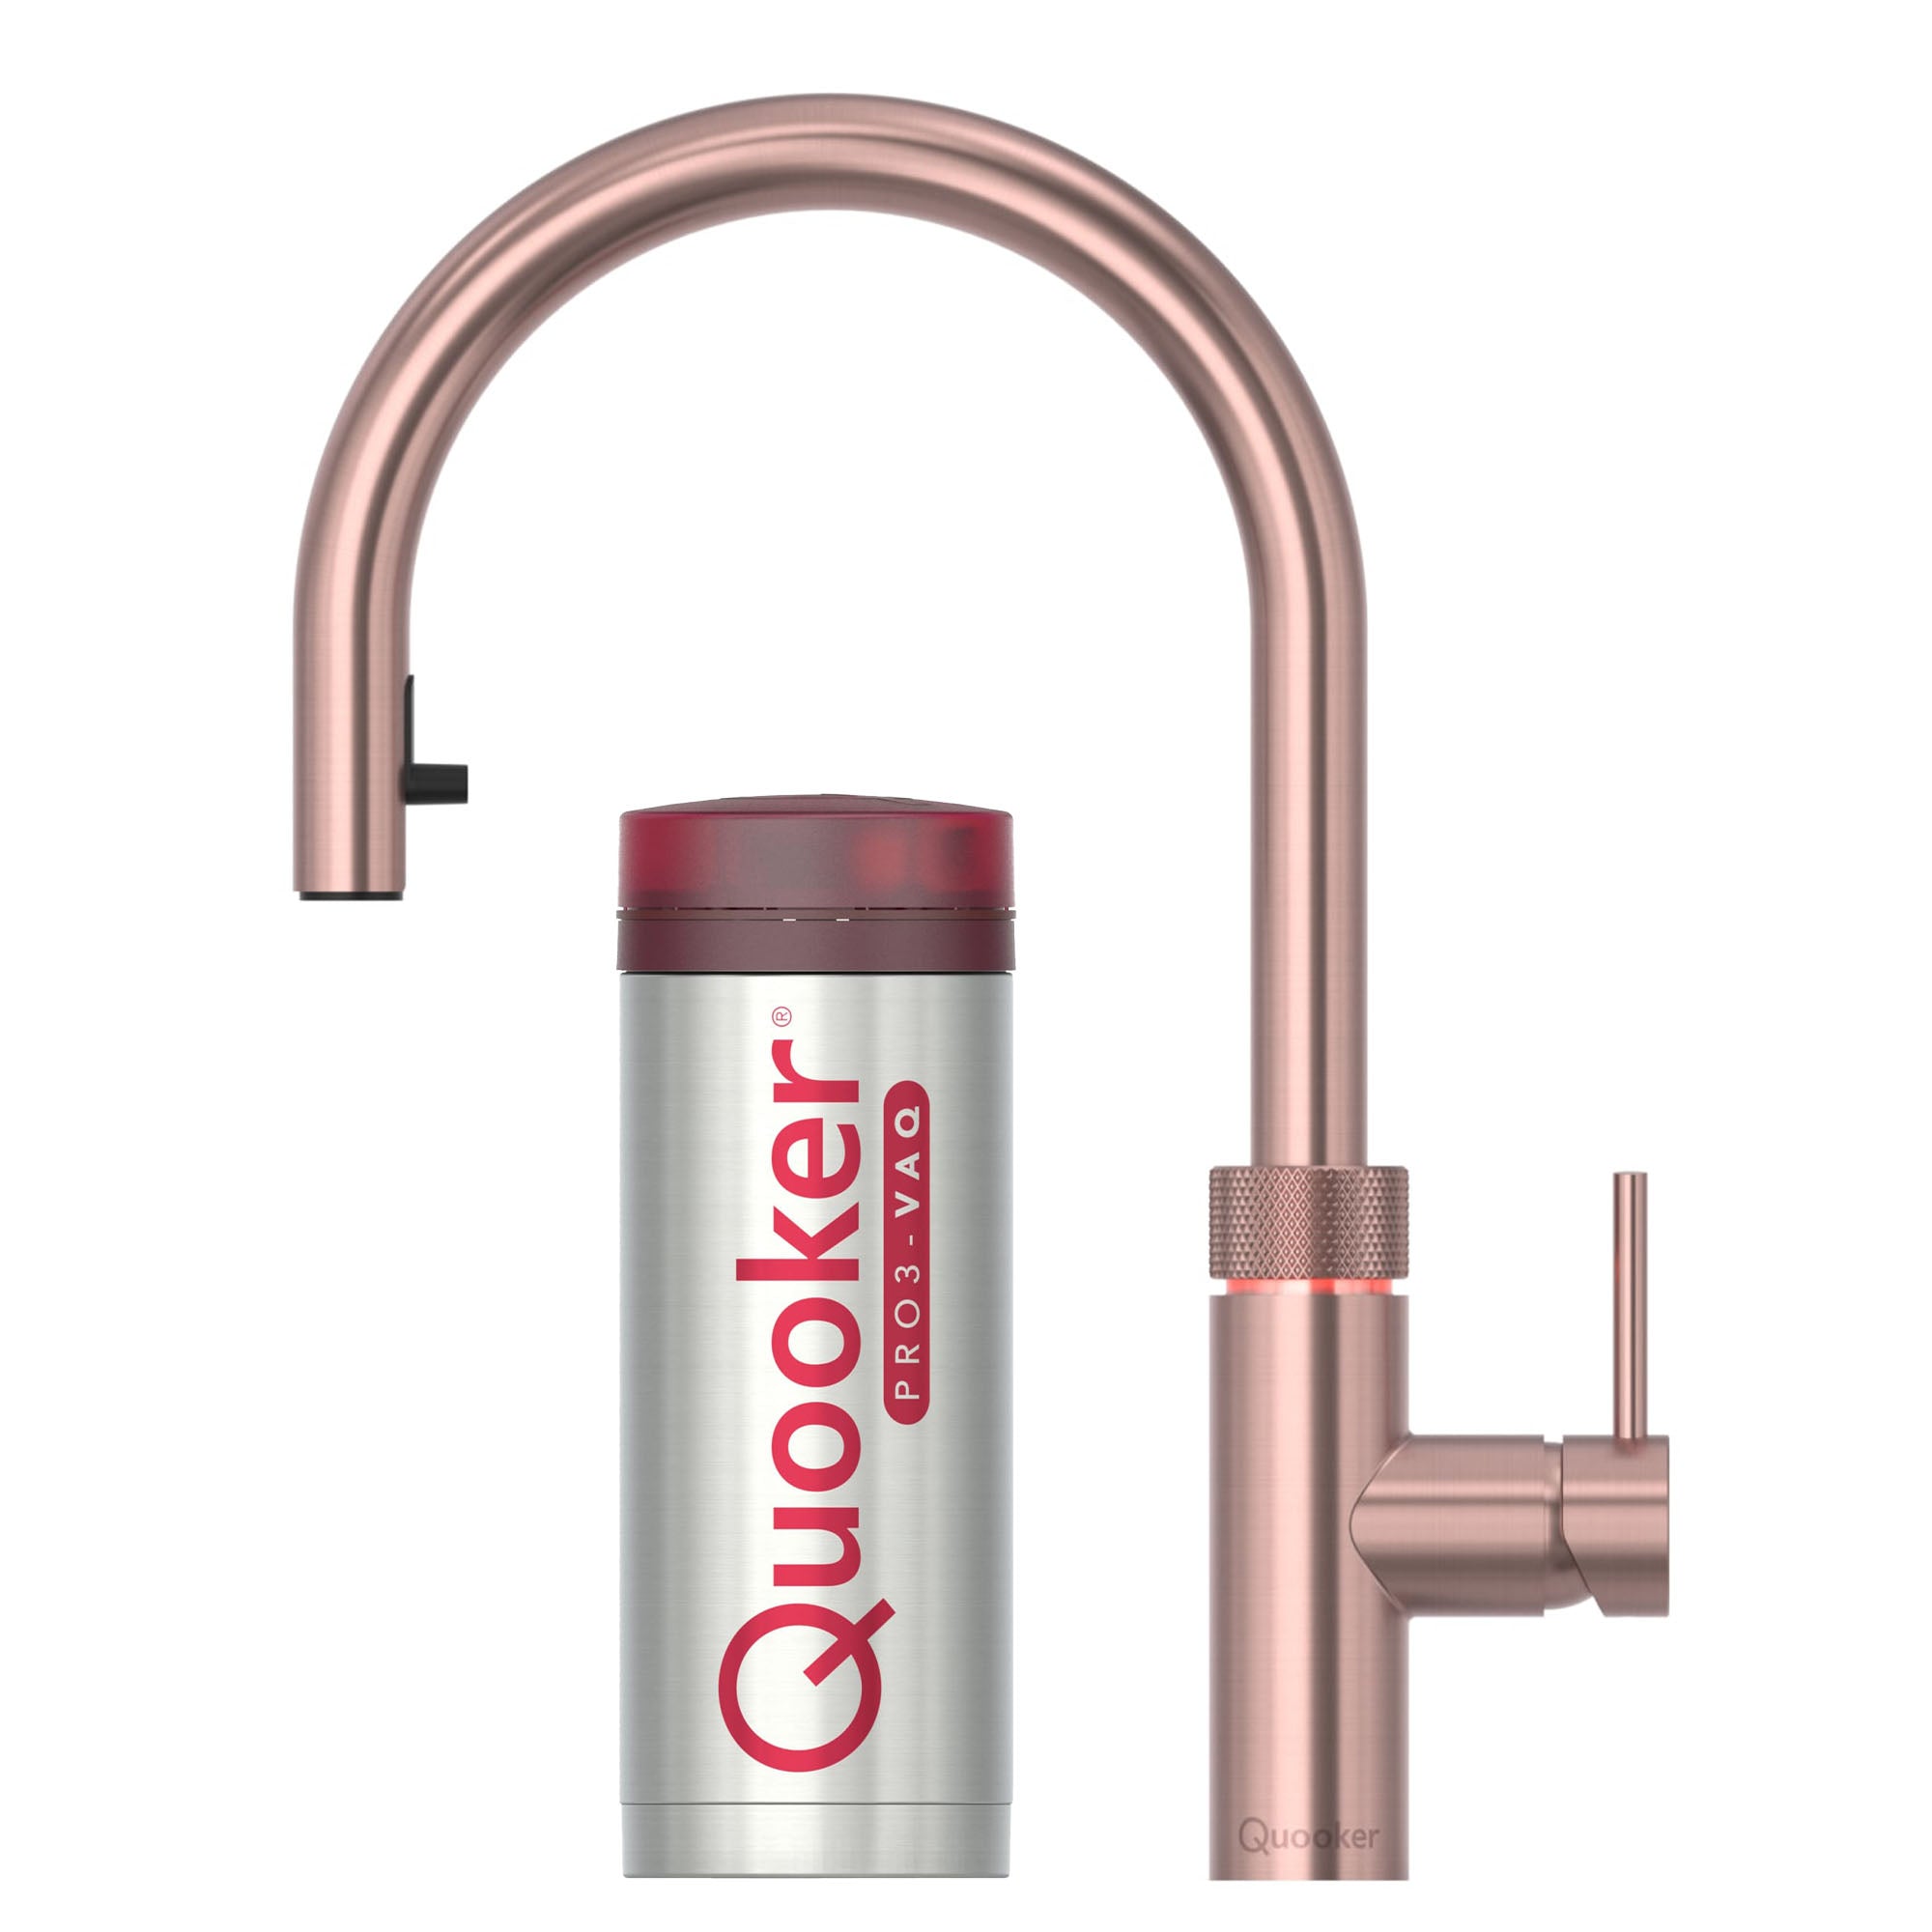 quooker flex boiling kitchen tap with pro 3 tank rose copper